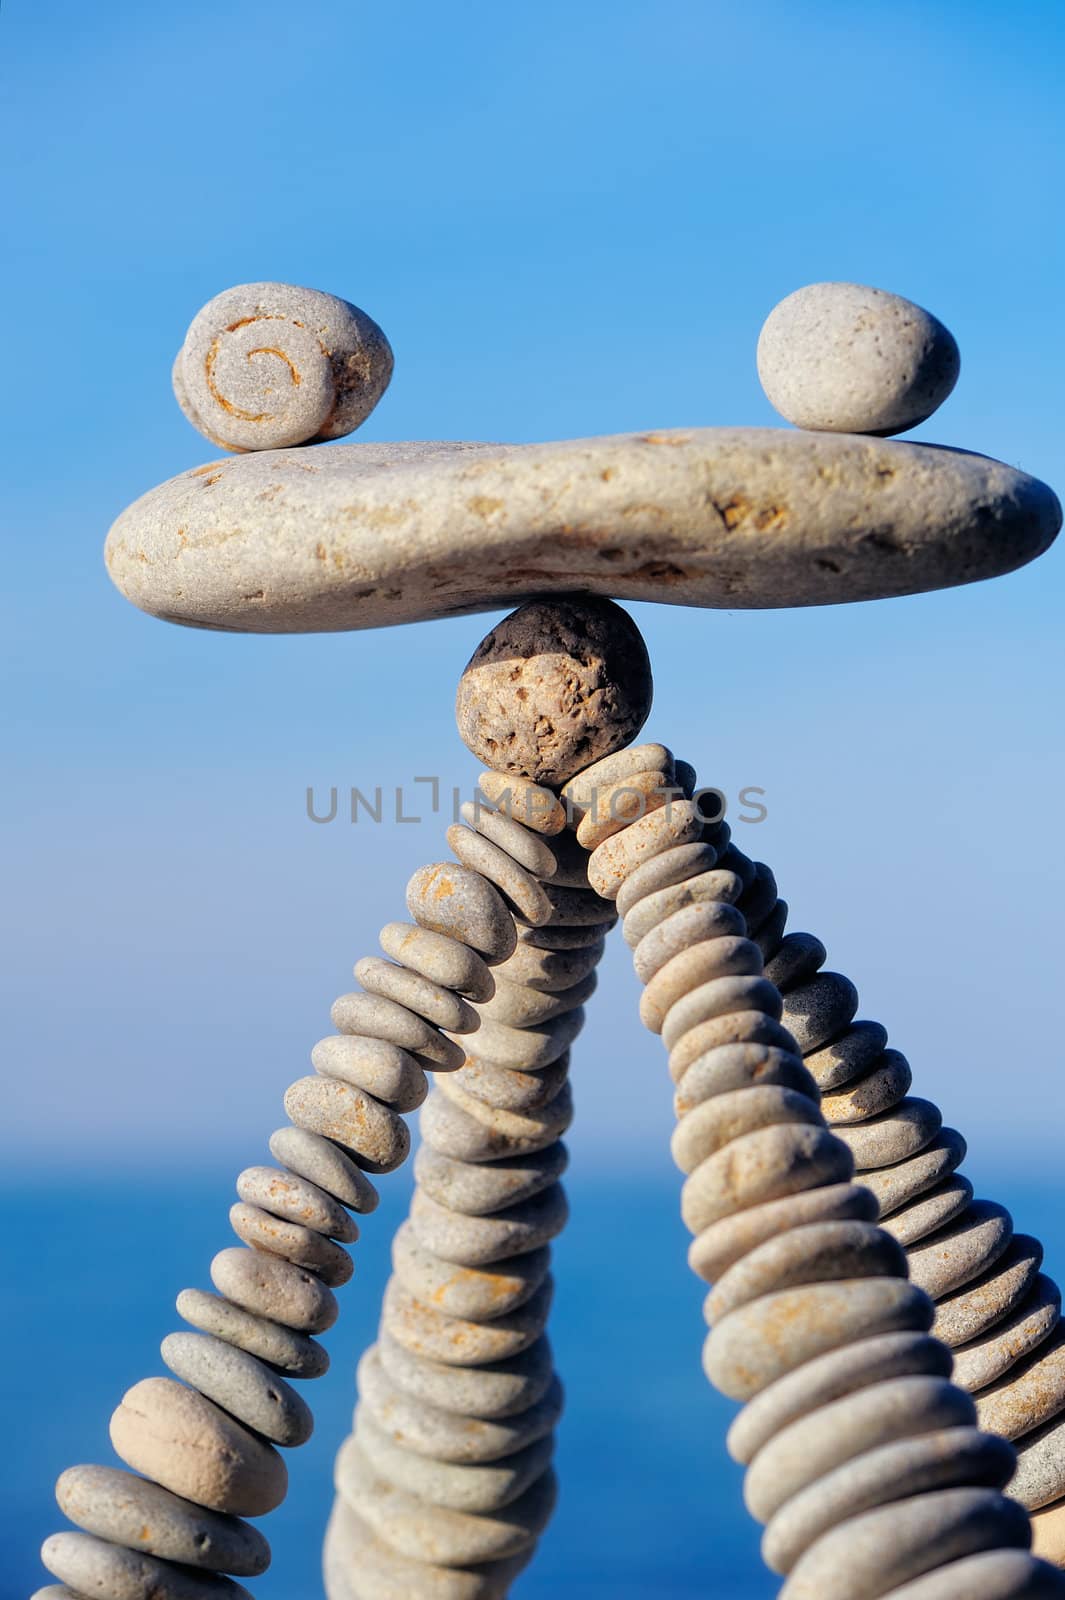 Balancing of white pebbles on the top of piles